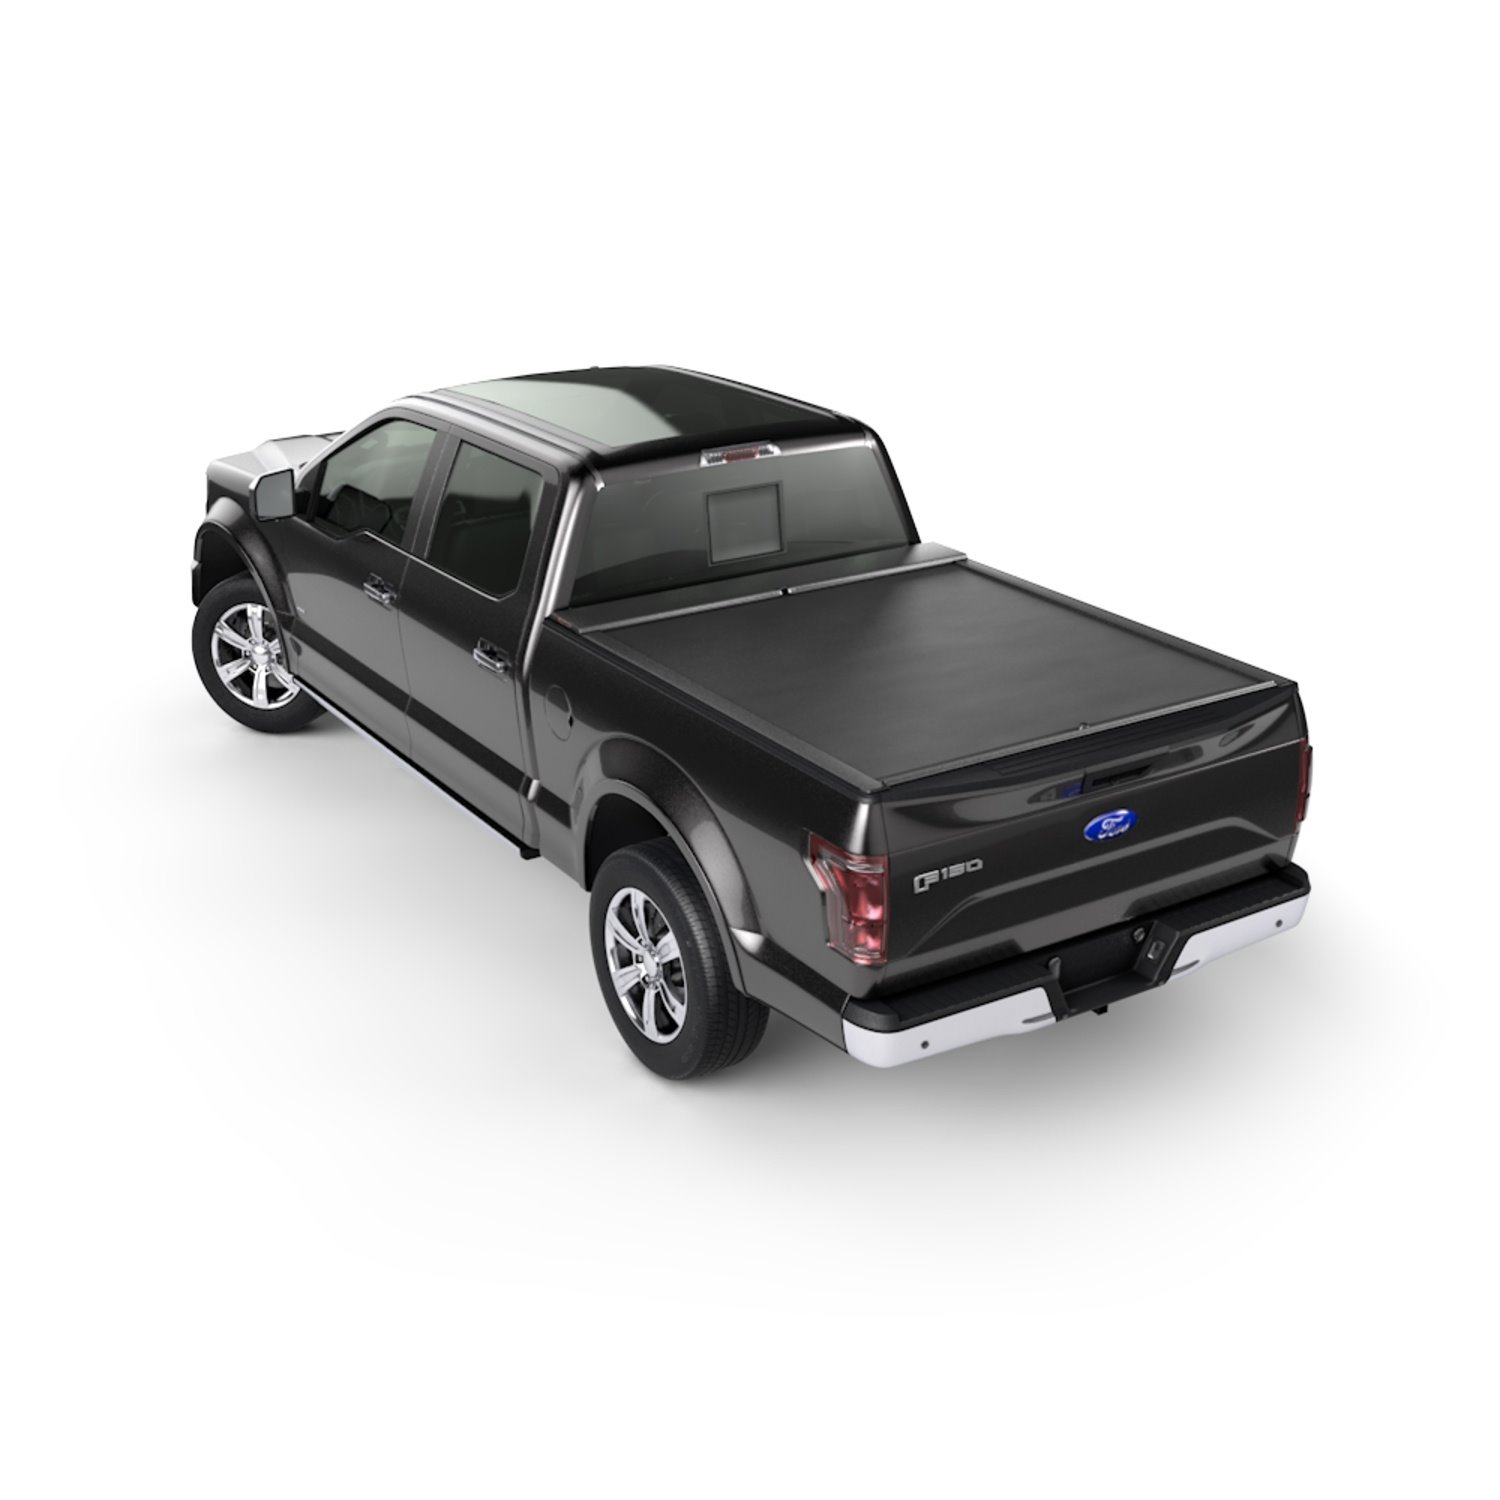 LG102M M-Series Locking Retractable Truck Bed Cover for 2015-2020 Ford F-150 [6.7 ft. Bed]